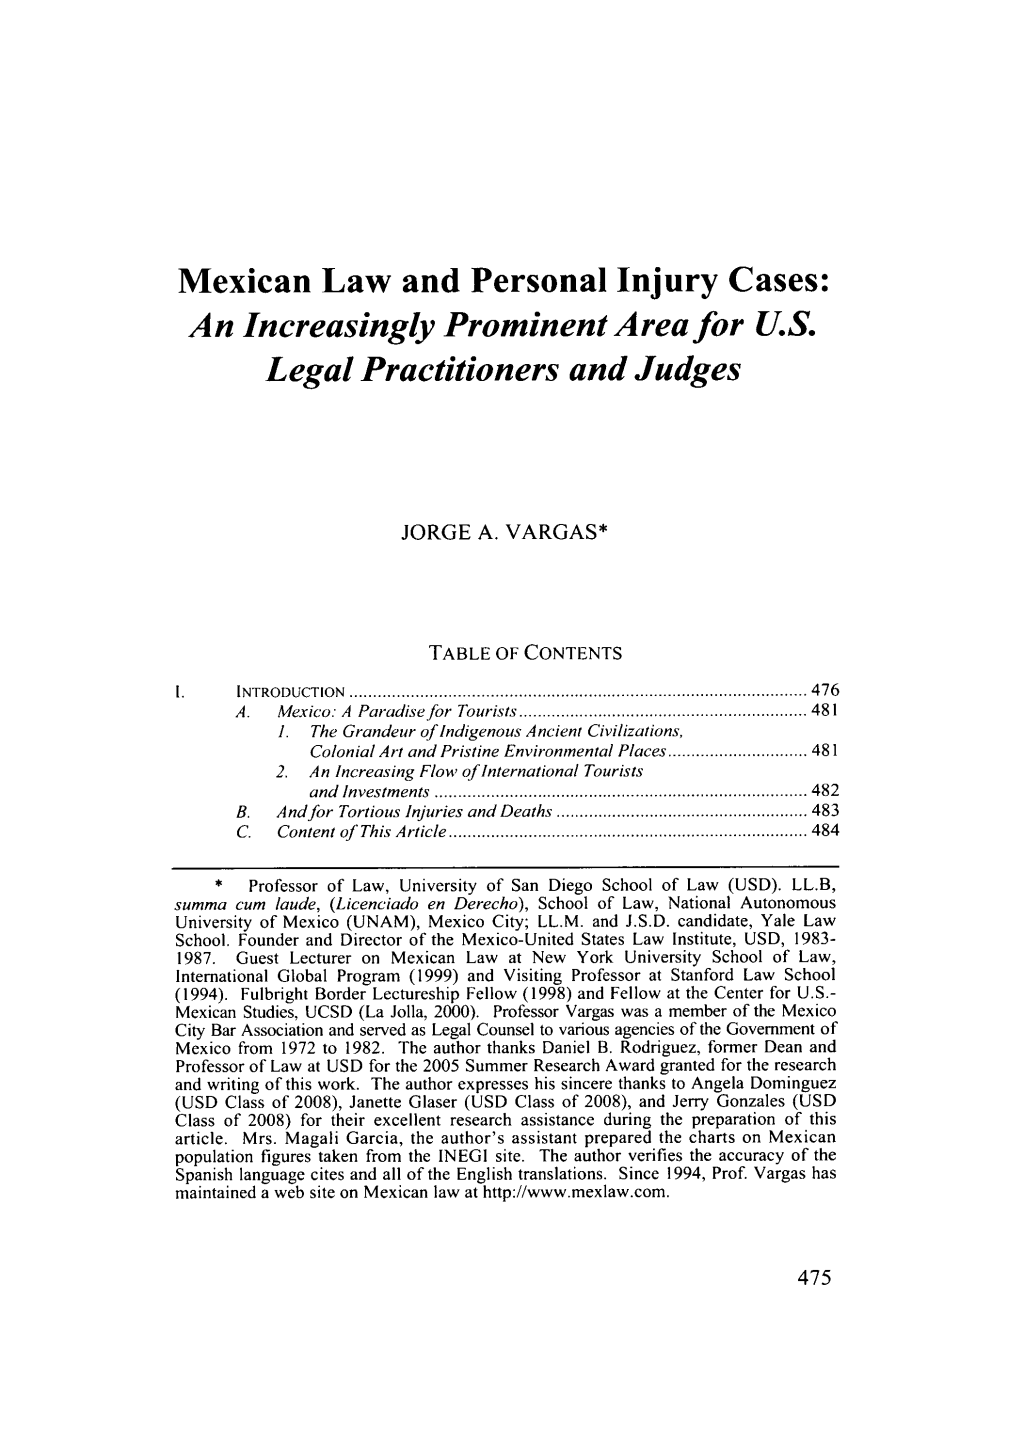 Mexican Law and Personal Injury Cases: an Increasingly Prominent Area for U.S